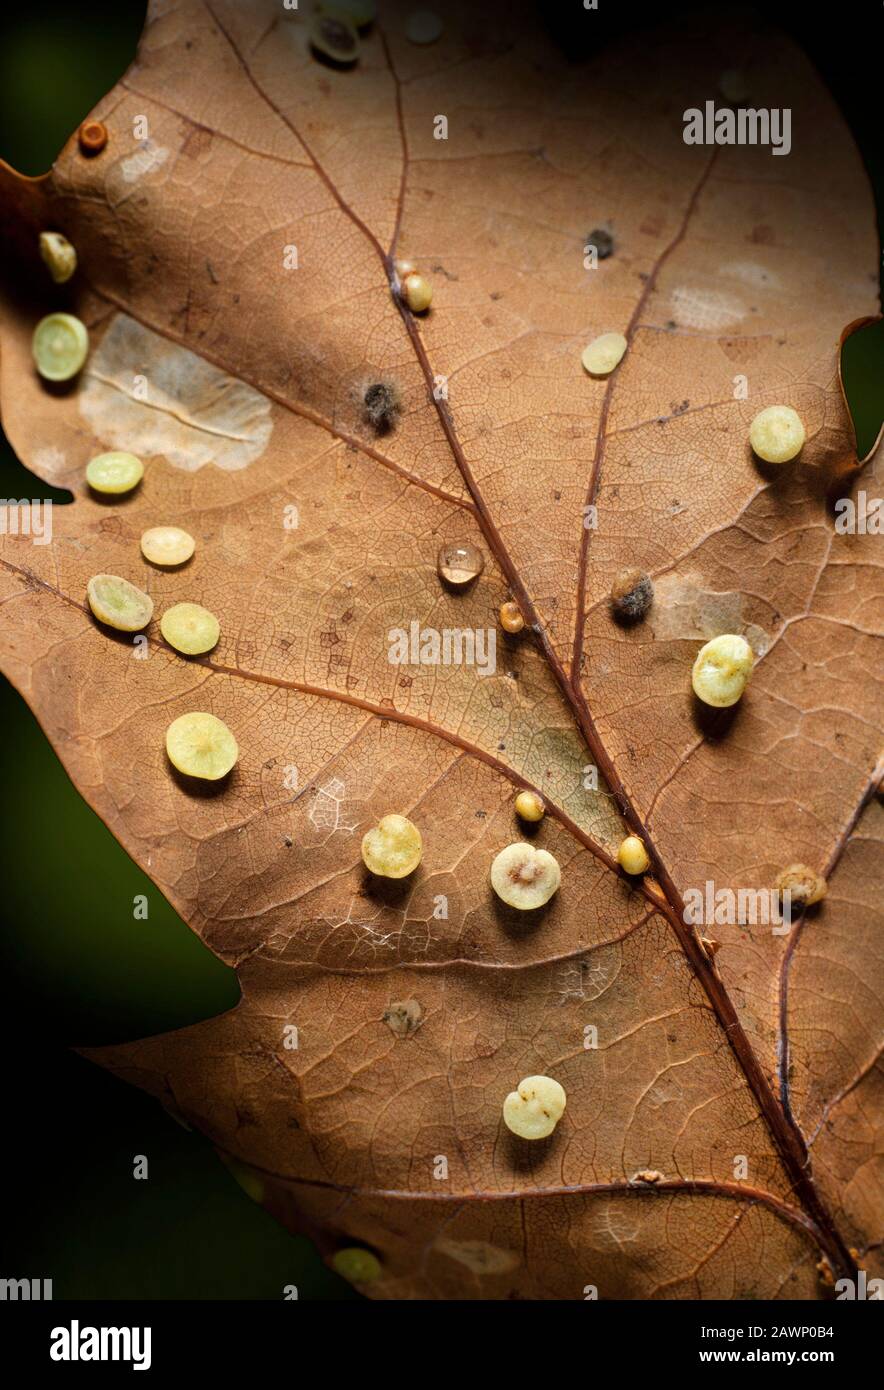 Smooth Spangle galls, Neuroterus albipes, growing on Oak leaf, the galls are caused by the wasp Neuroterus albipes Stock Photo